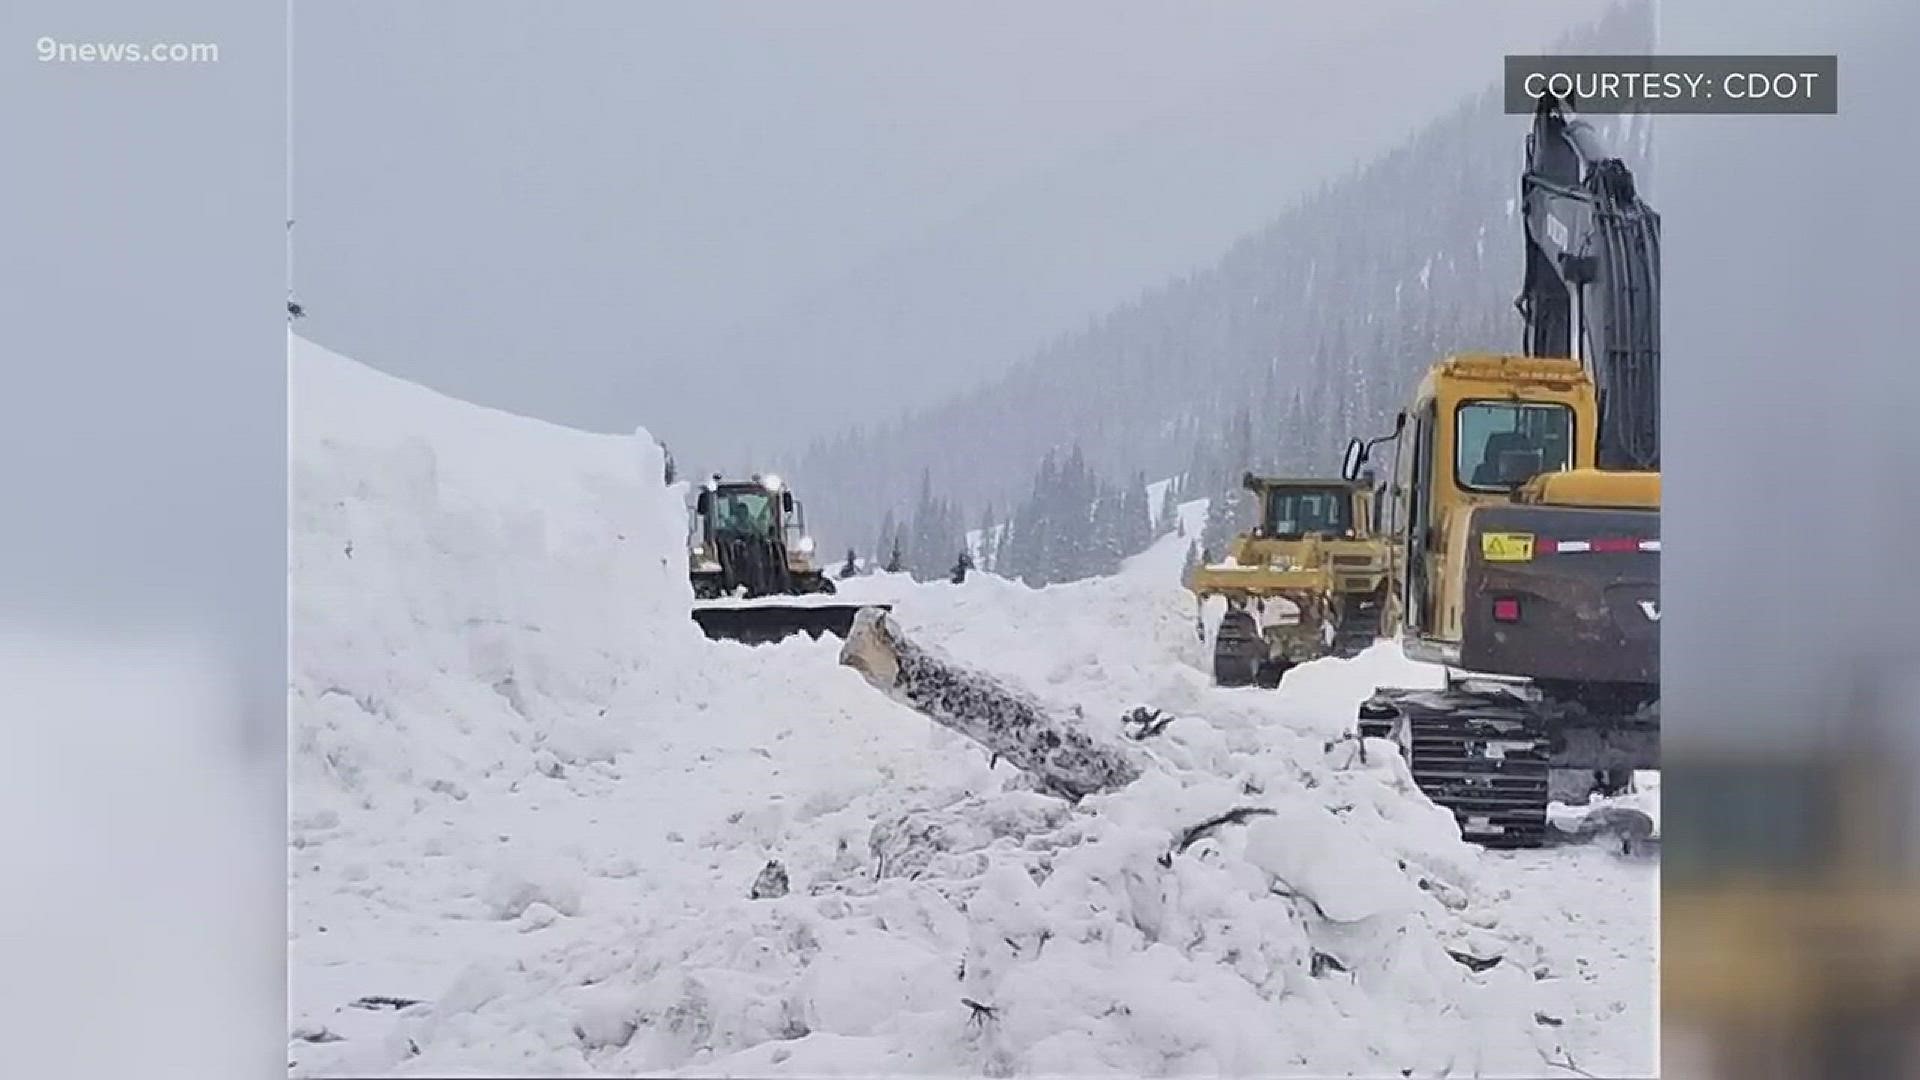 Avalanche mitigation last week pushed 40 feet to 60 feet of snow onto Highway 550. CDOT estimates the stretch of highway will be closed for about another week.